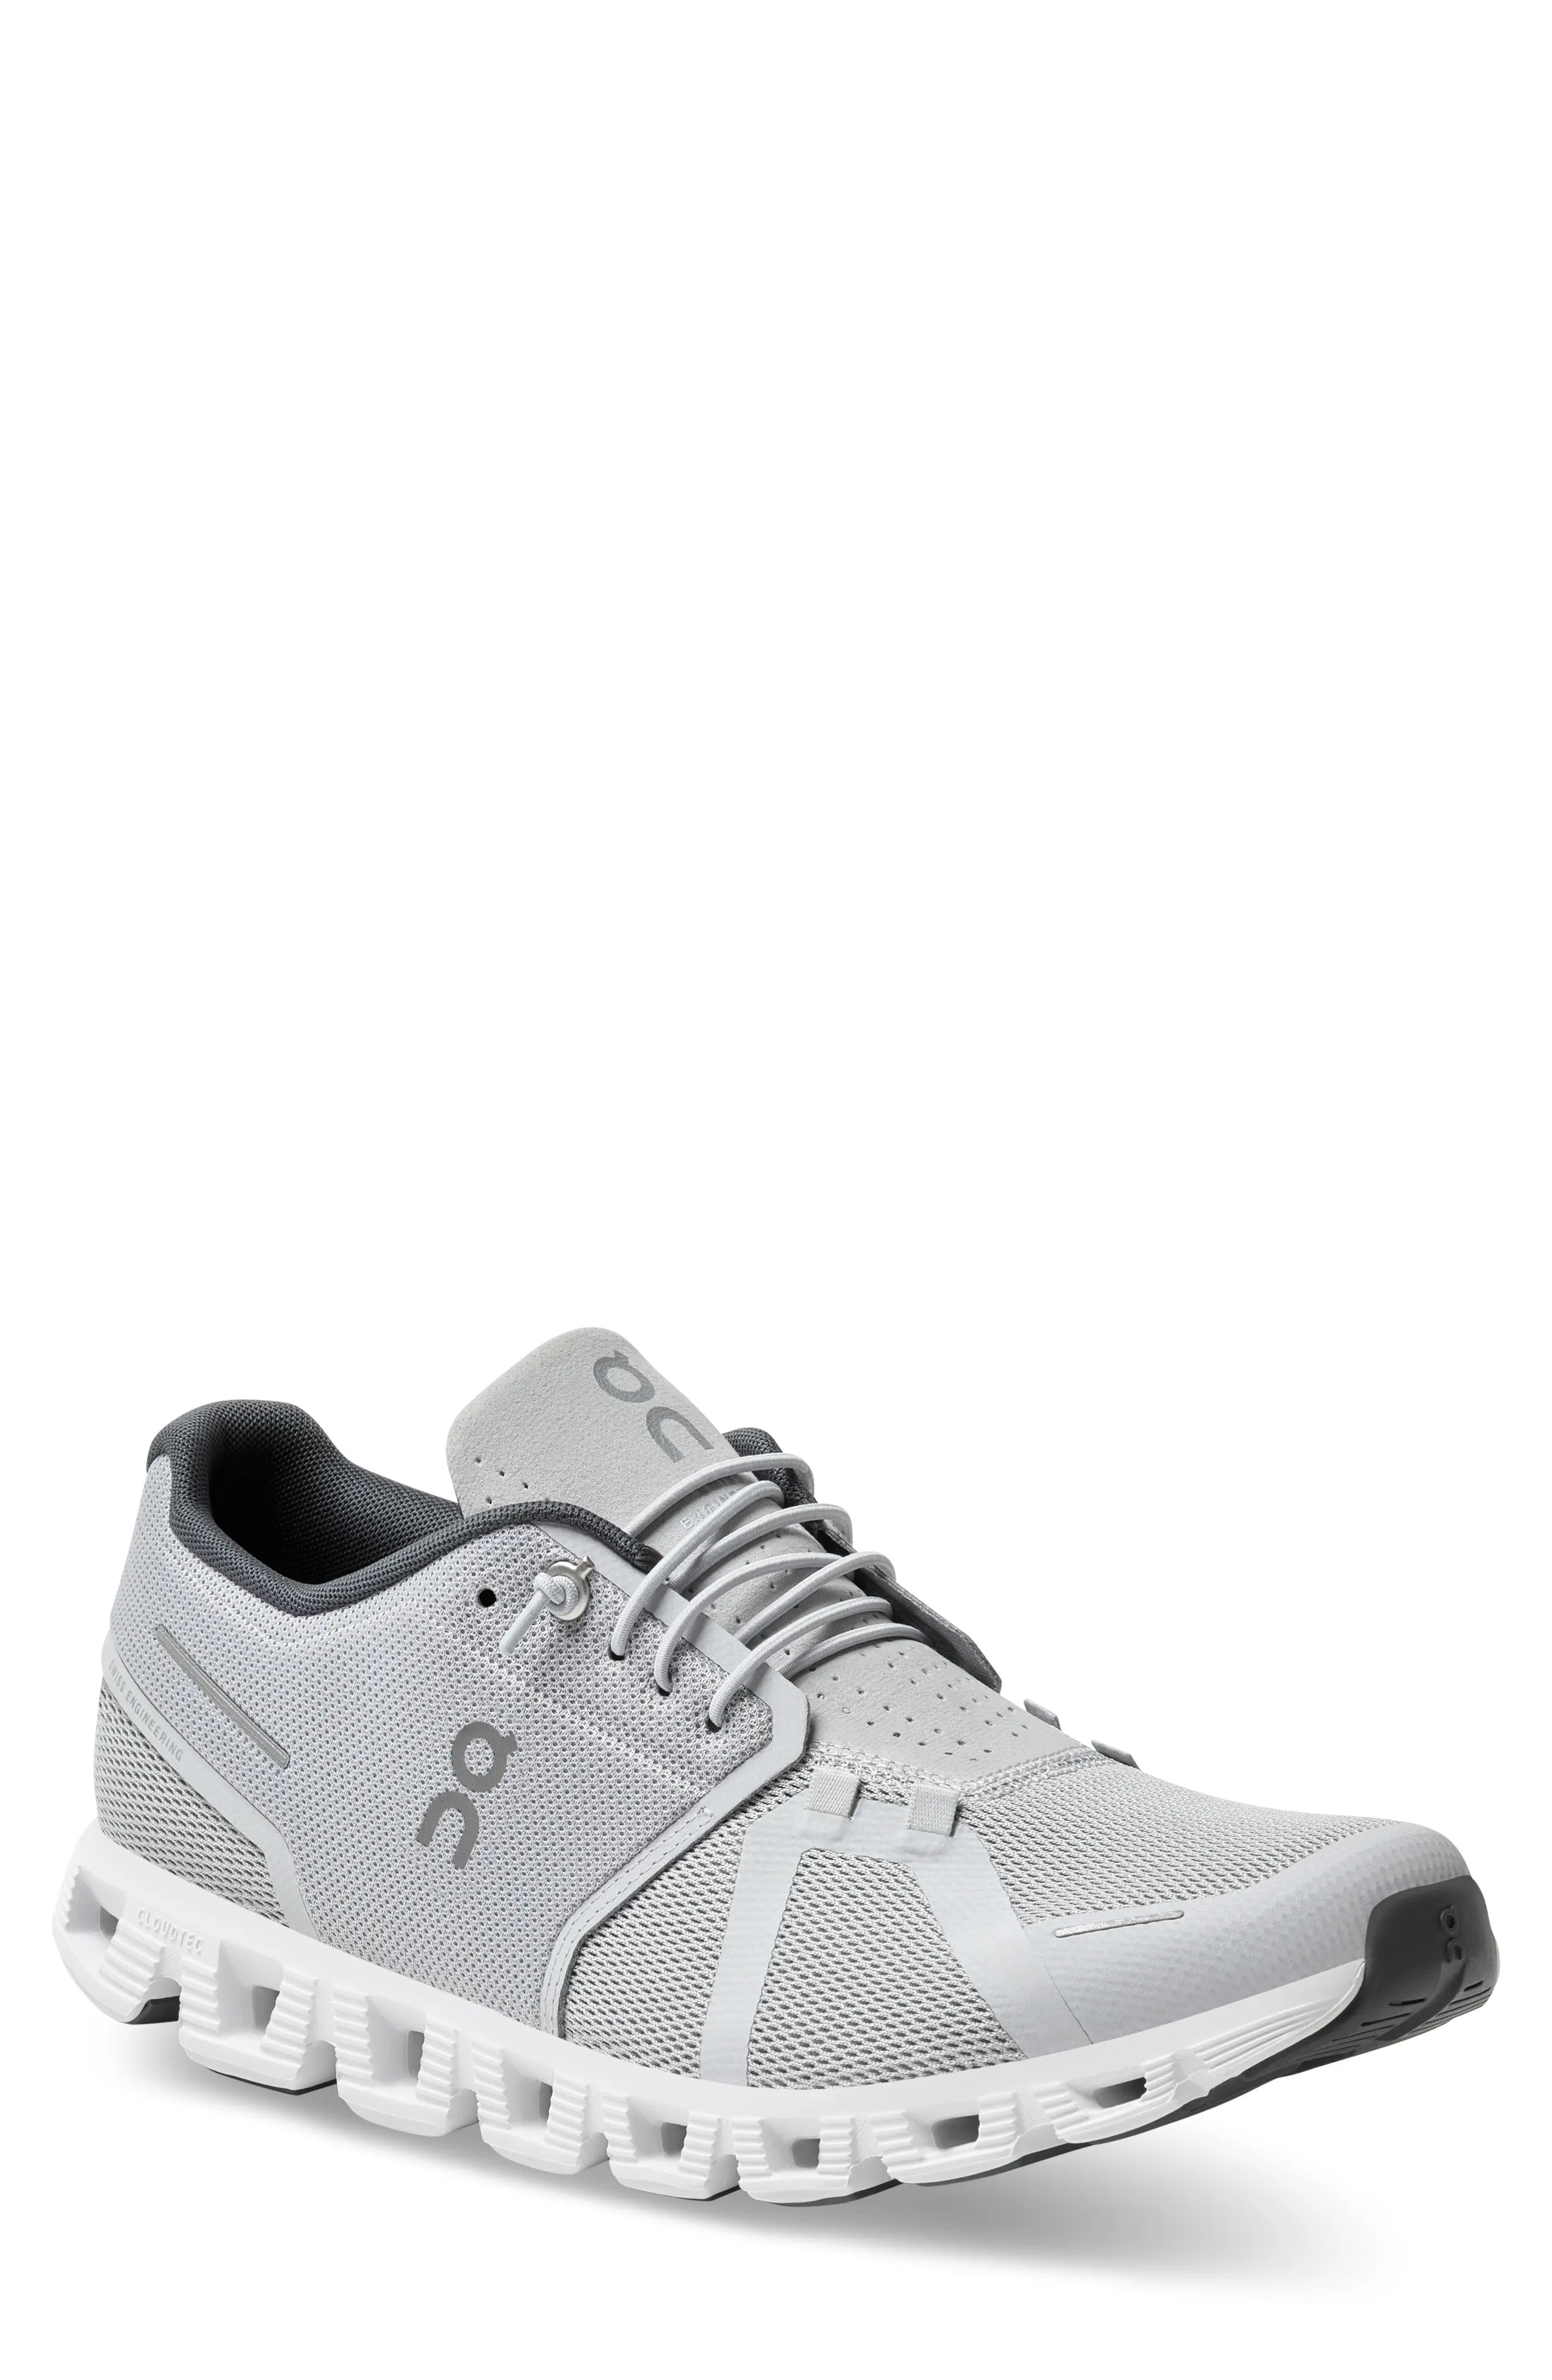 On Cloud 5 Running Shoe in Glacier/White at Nordstrom, Size 9 | Nordstrom